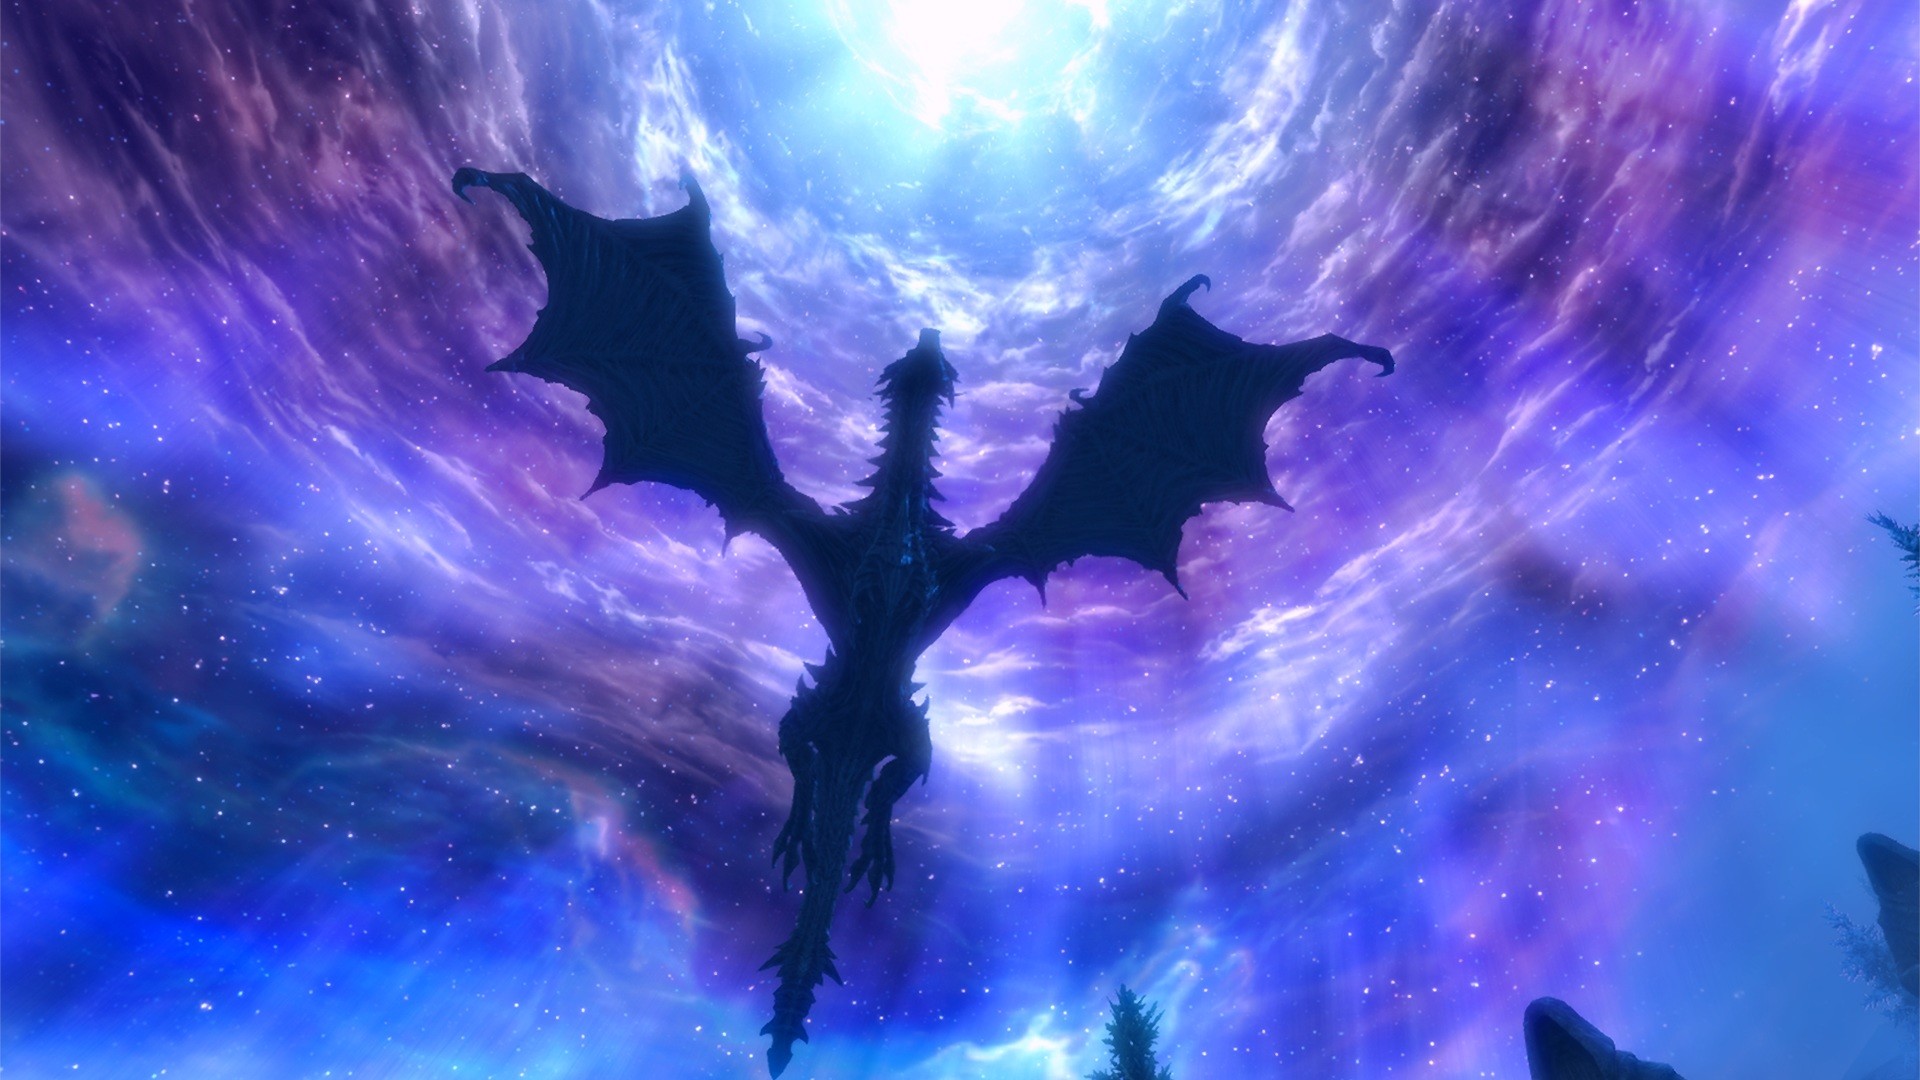 Dragon in the sky from the game The Elder Scrolls, Skyrim